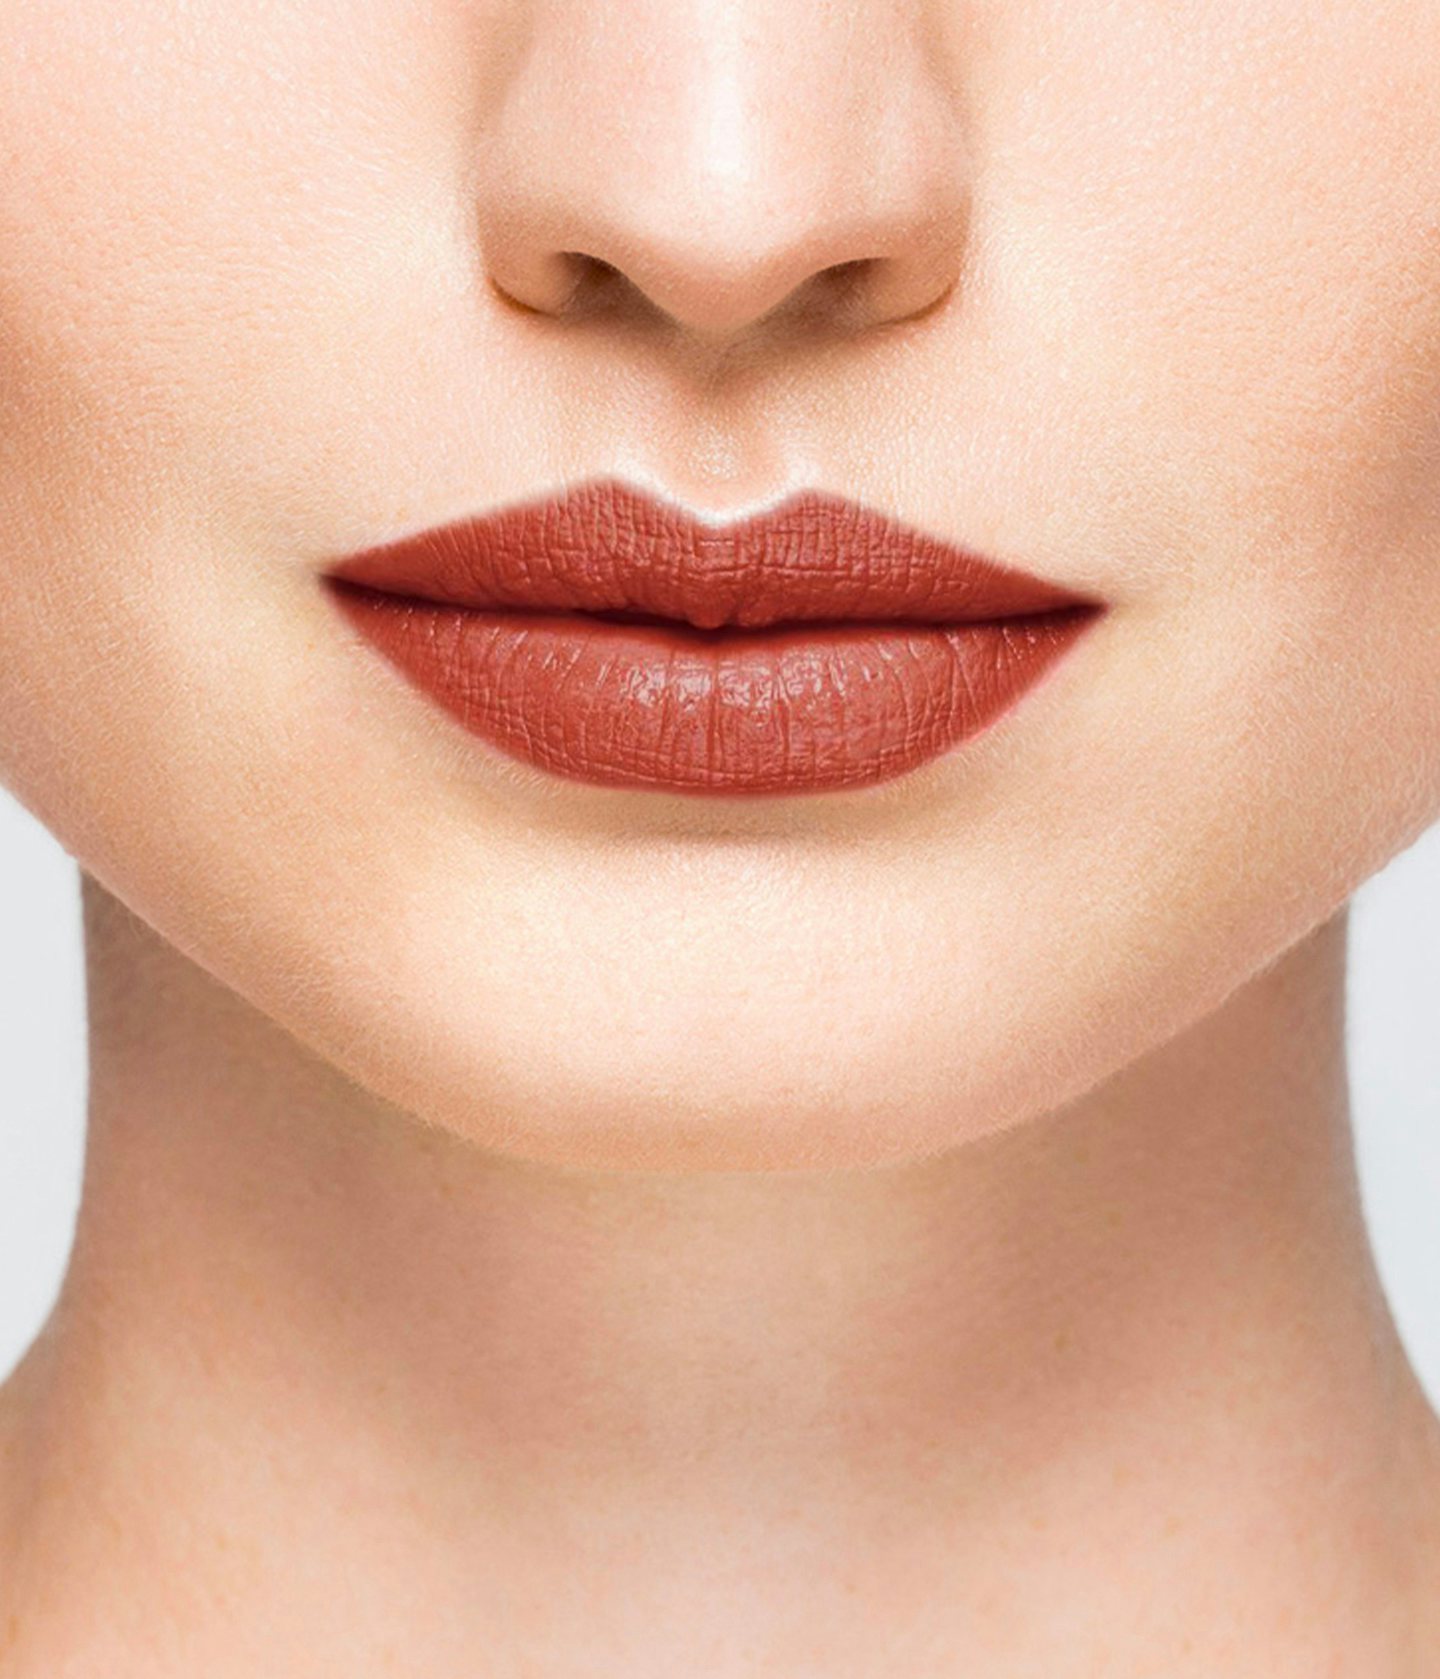 La bouche rouge The Koto balm shade on the lips of a fair skin model